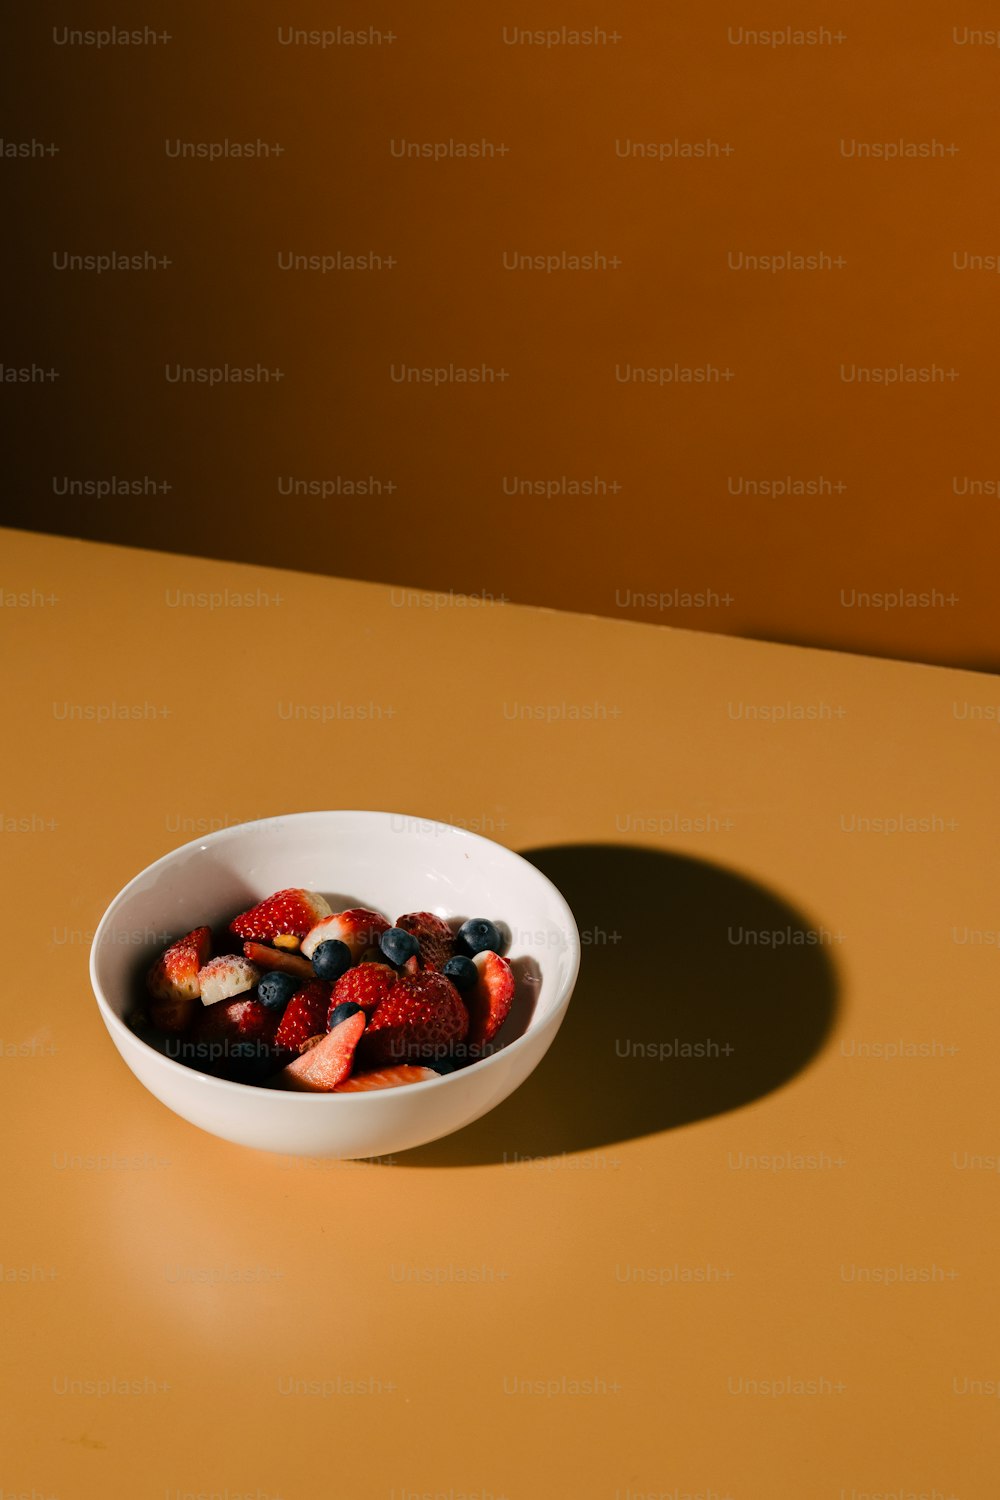 a bowl of strawberries and blueberries on a table